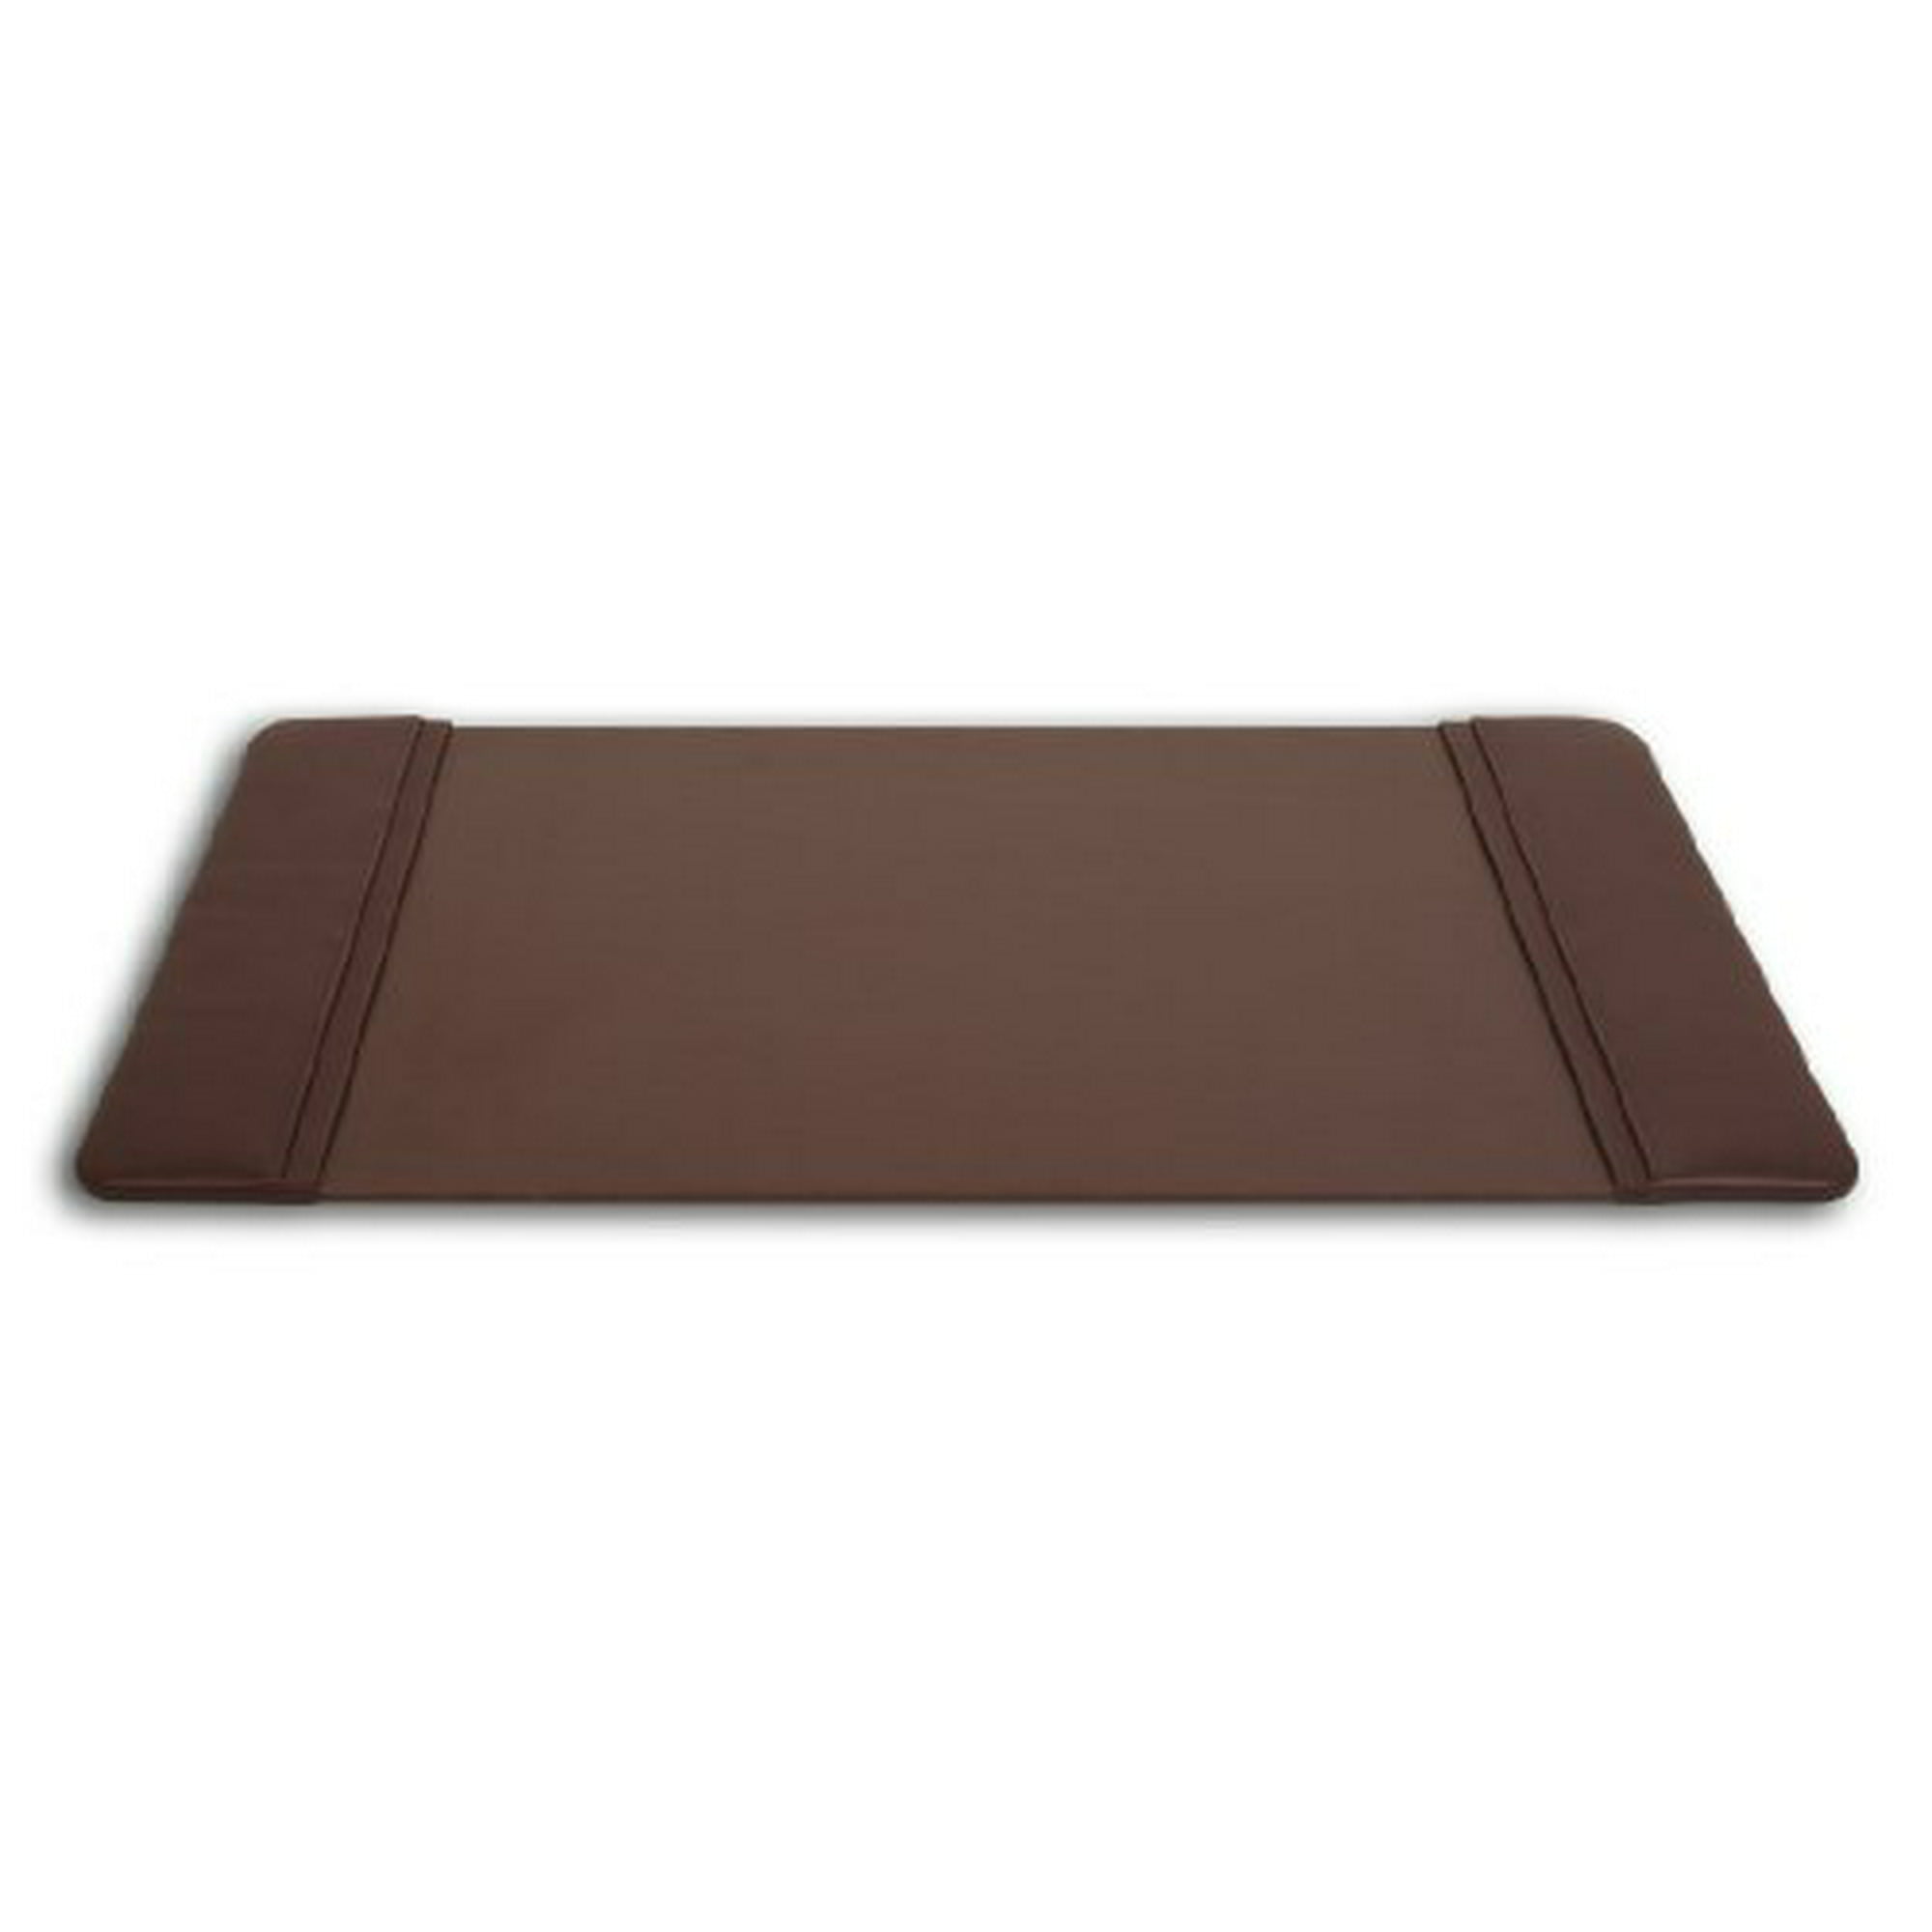 Dacasso Chocolate Brown Leather Desk Pad With Side Rails 25 5